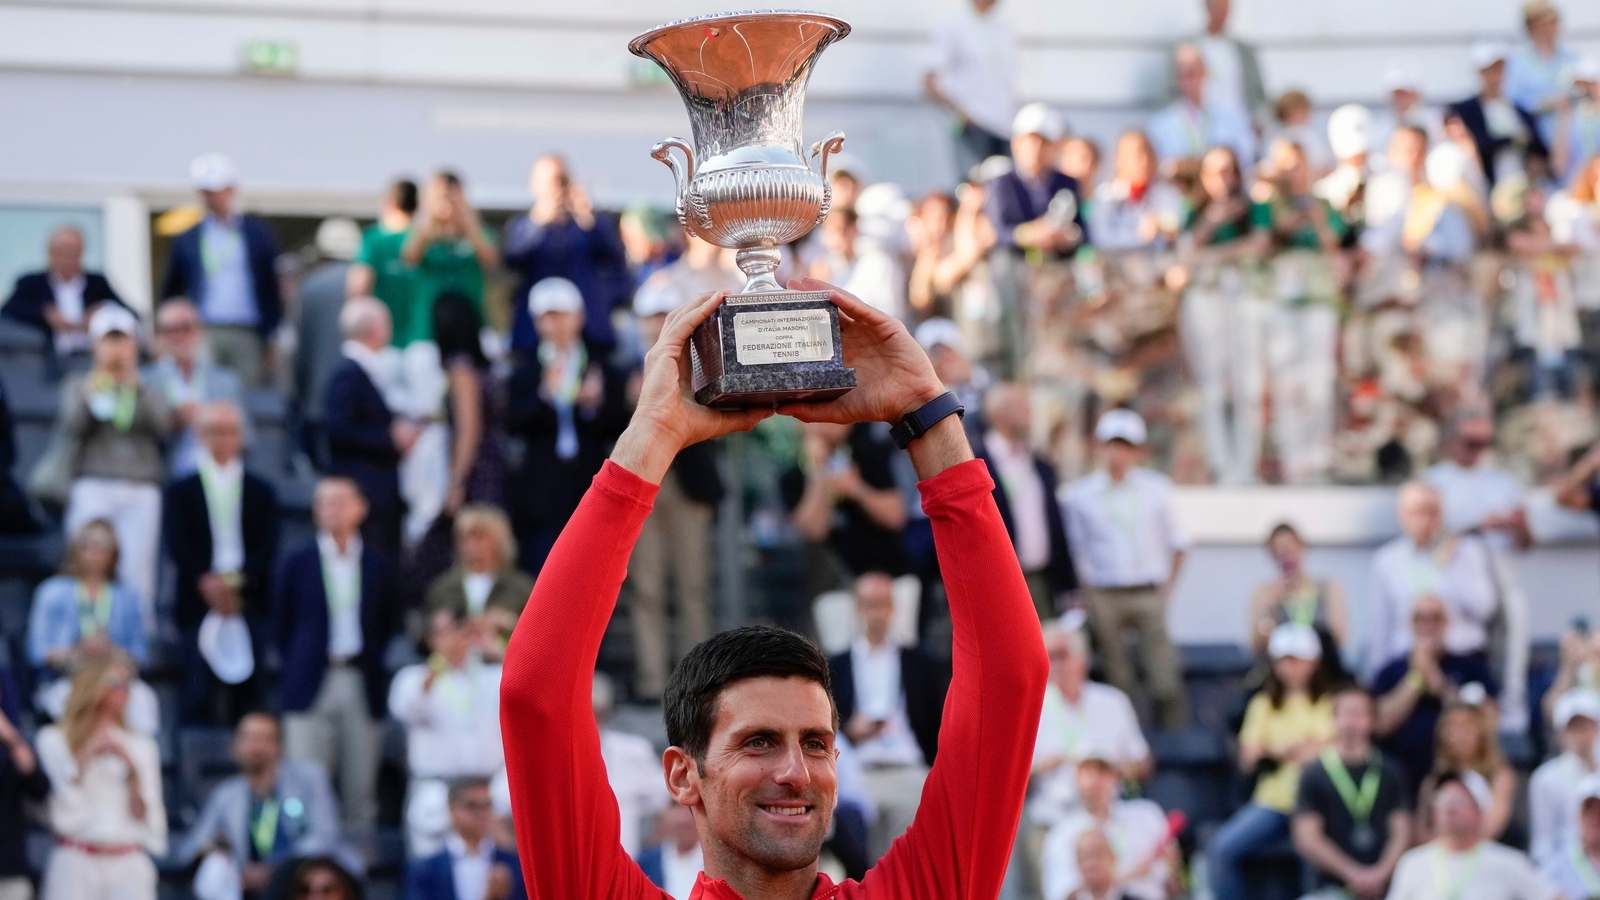 Novak Djokovic shows he’s back in top form with Italian Open title